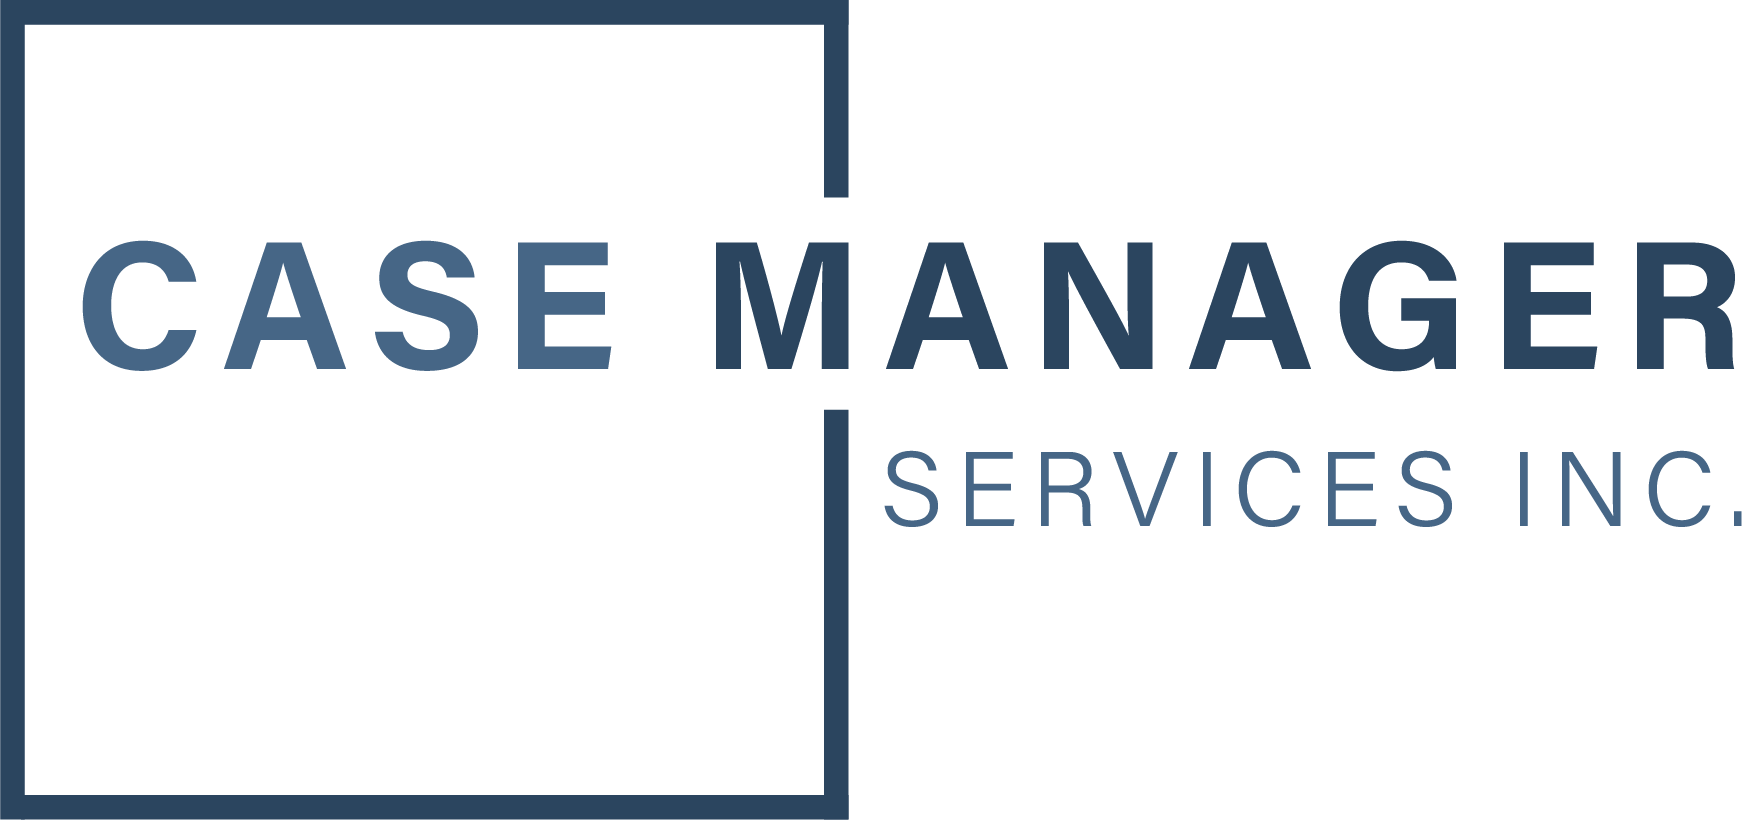 Case Manager Services, Inc. 